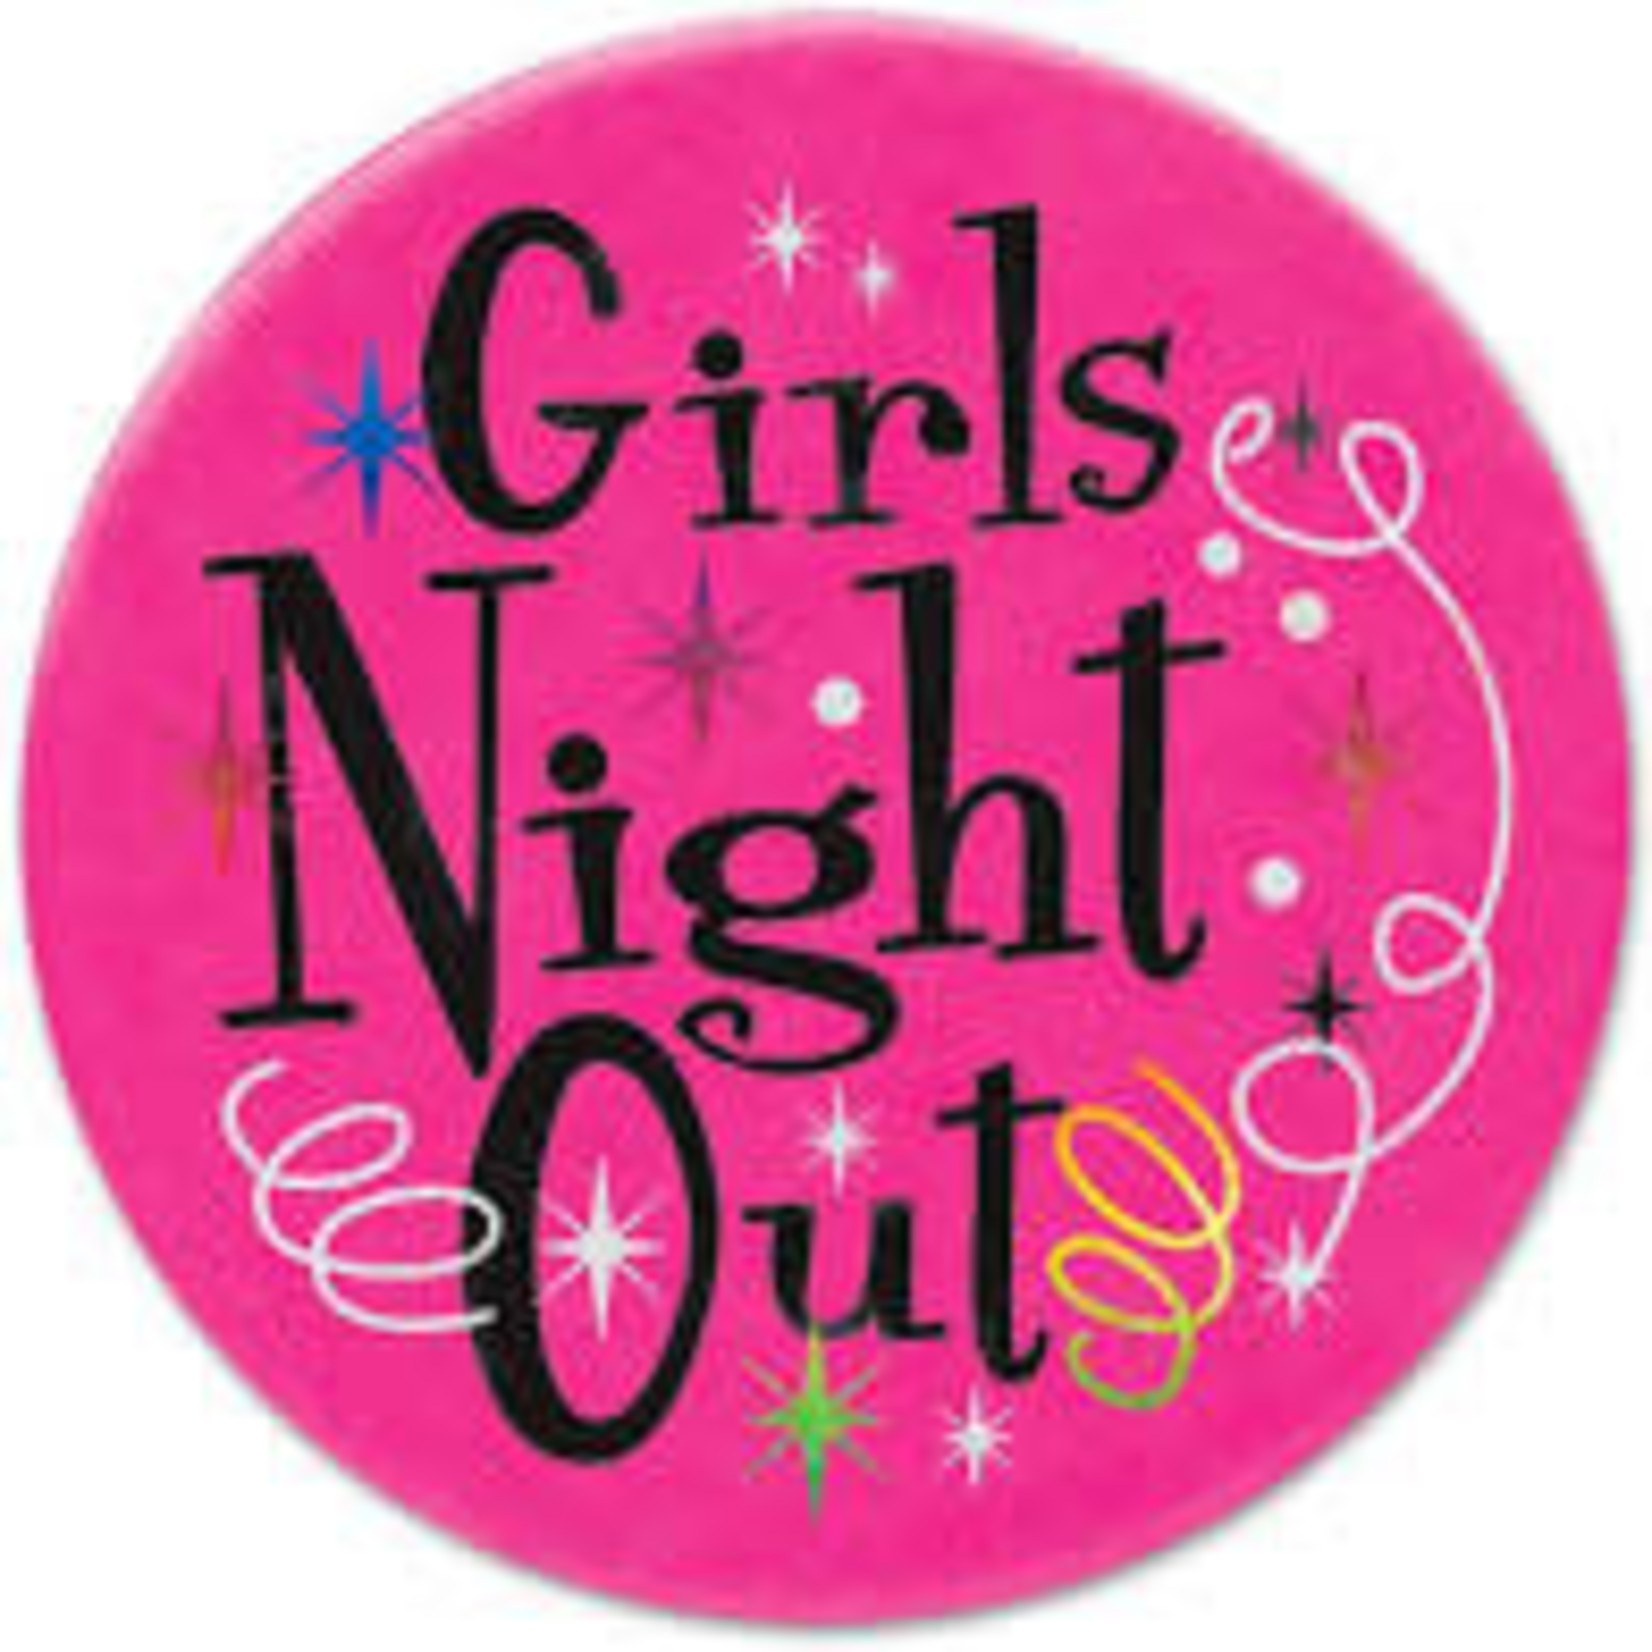 Beistle Girls Night Out Satin Button